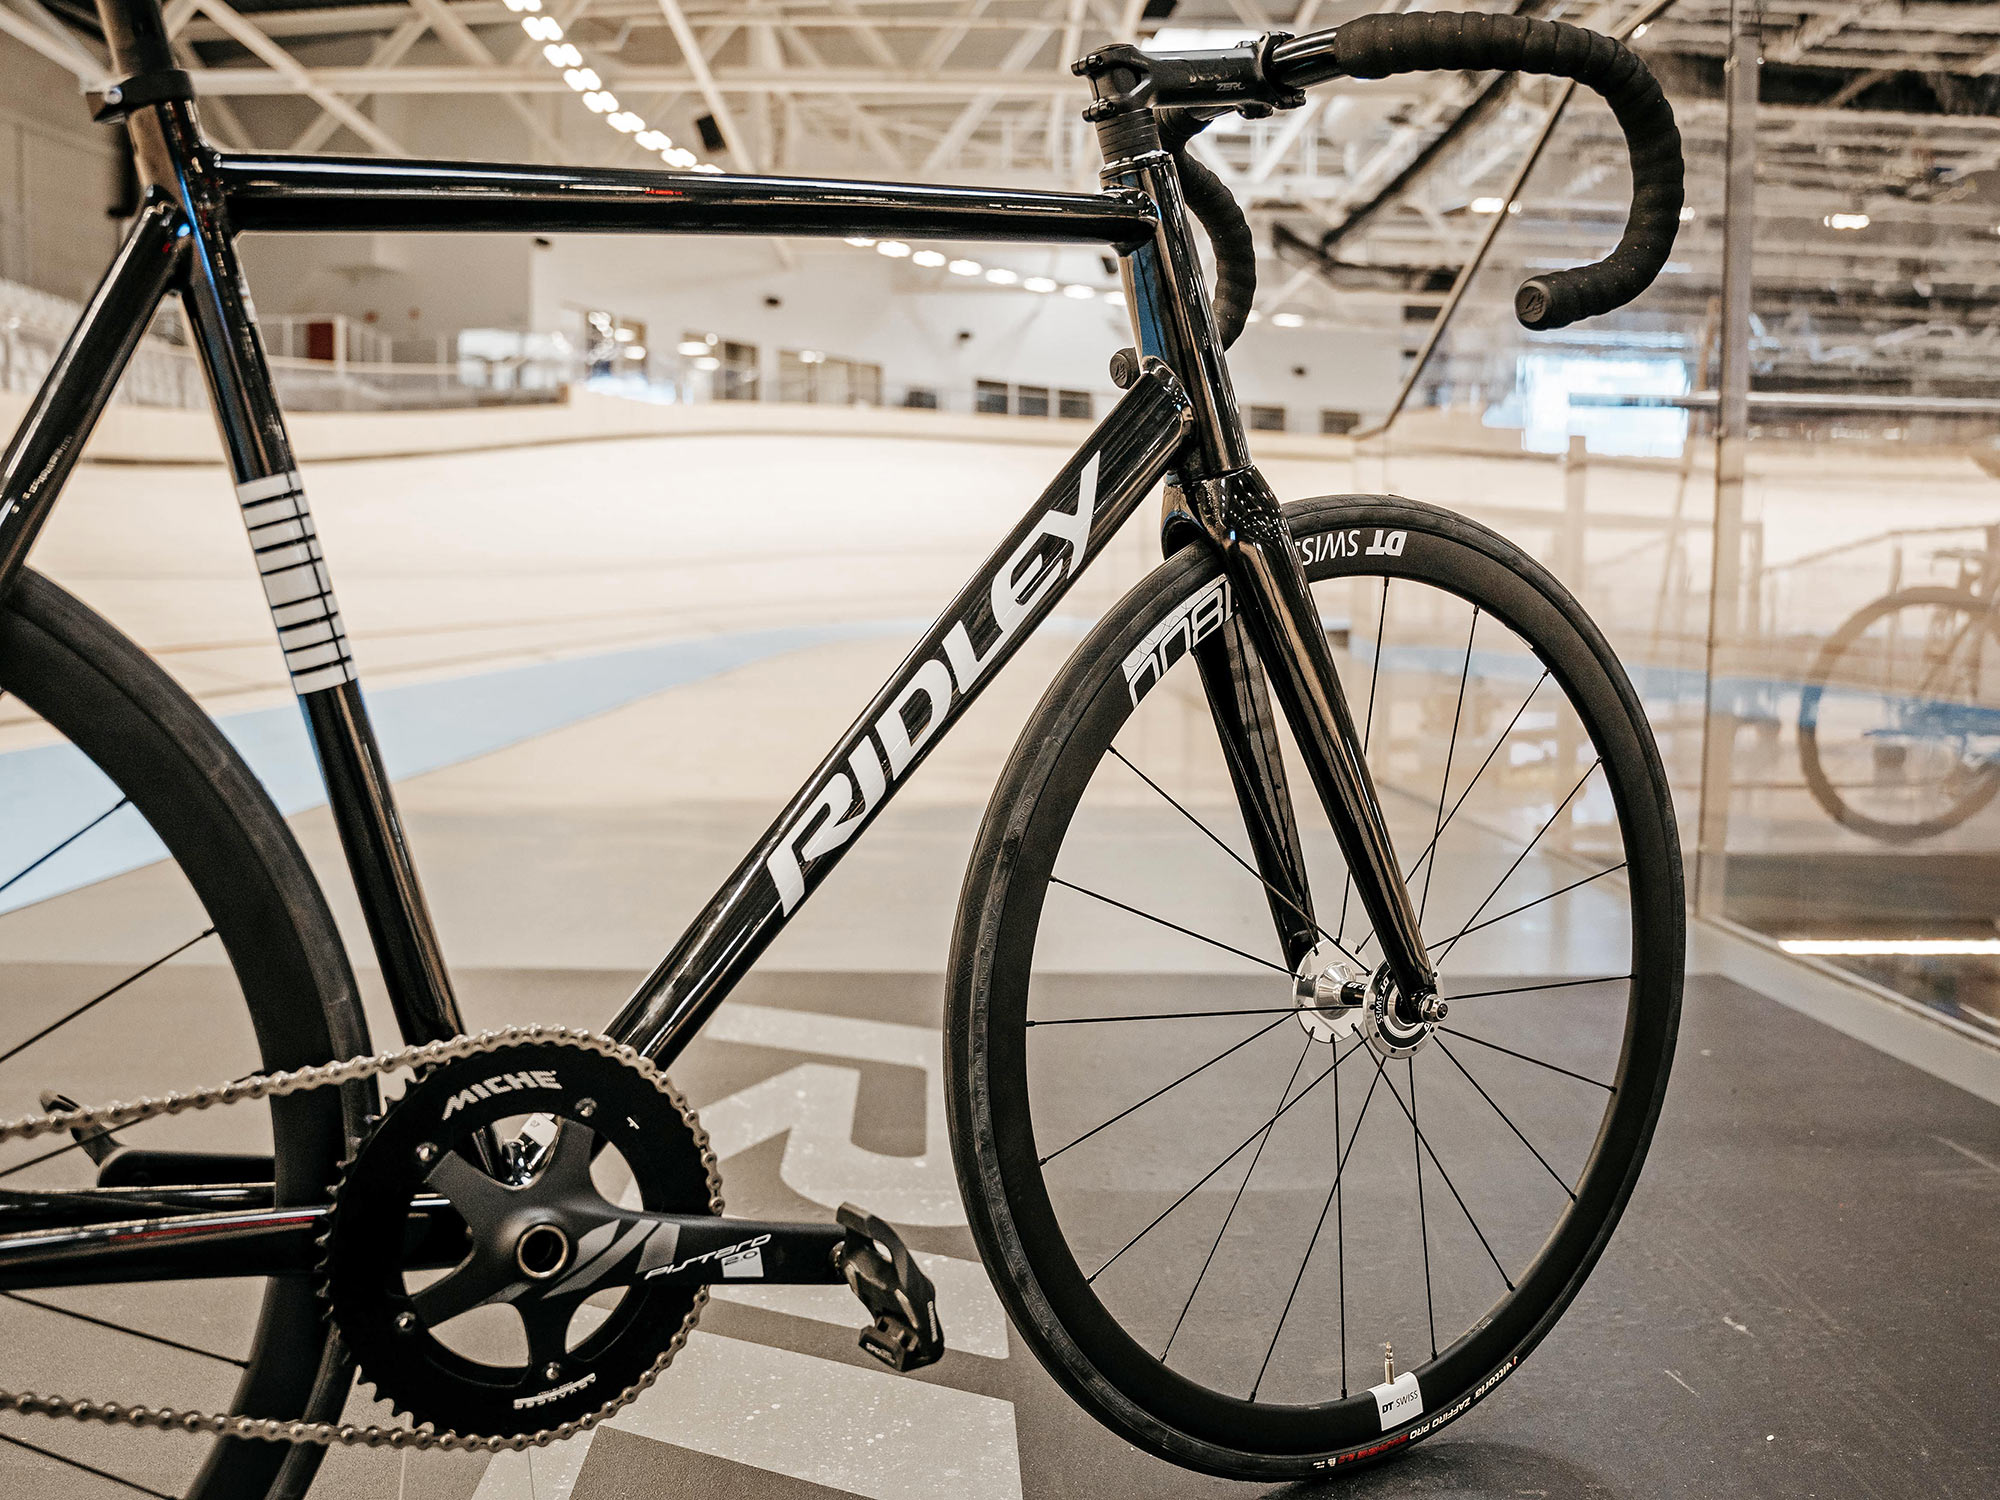 Ridley Arena A affordable aluminum alloy track bike, at Zolder